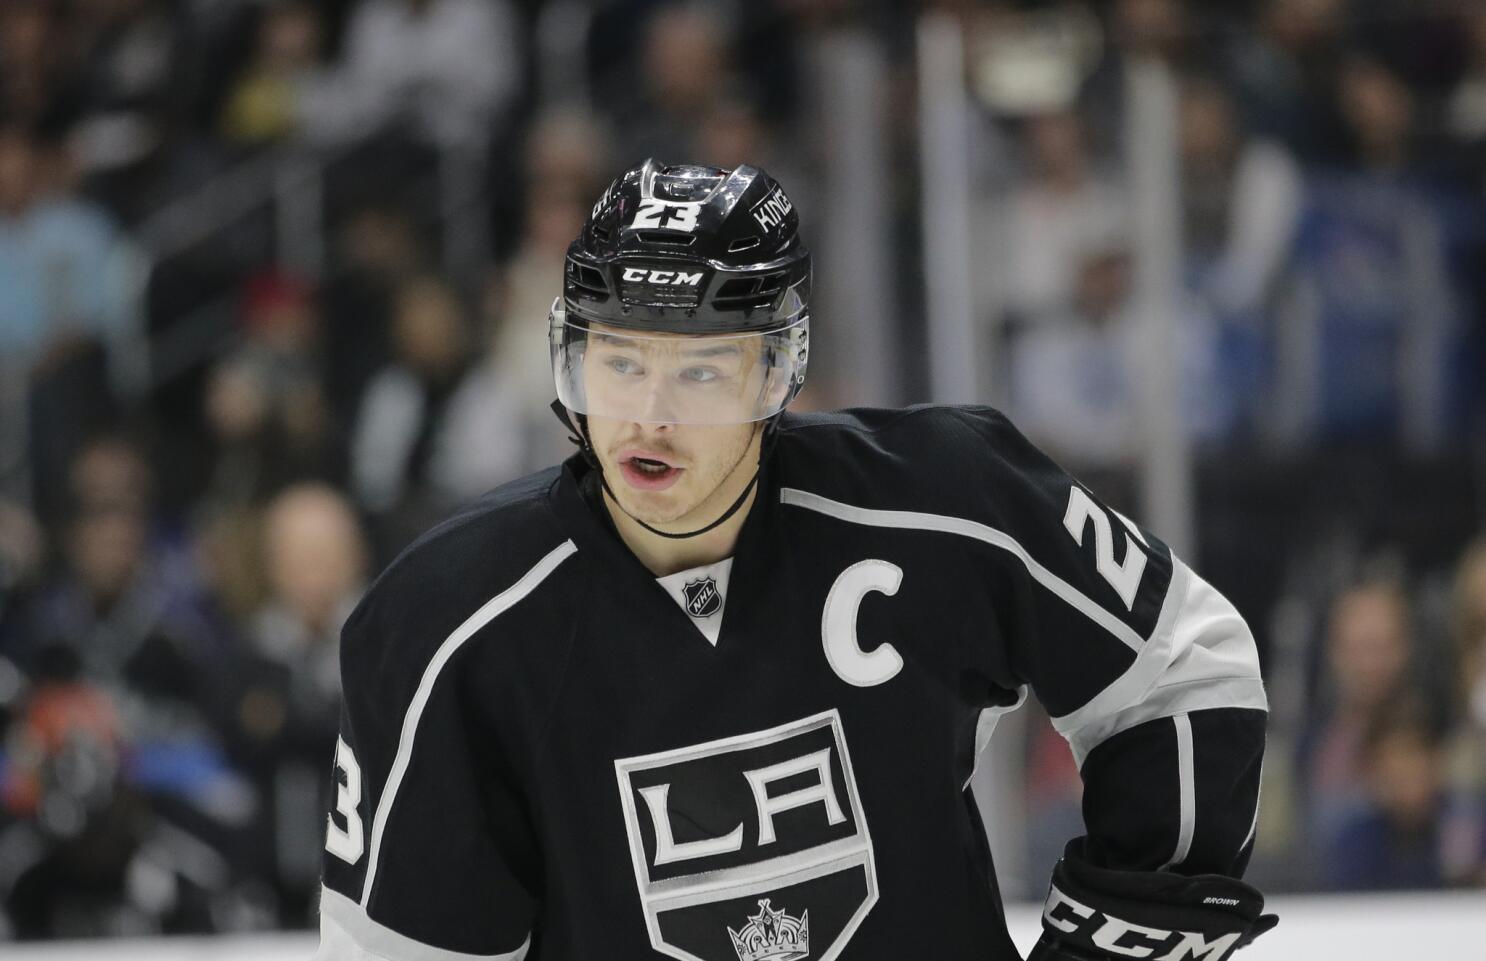 Kings great Dustin Brown 'left it all out there' – Daily News